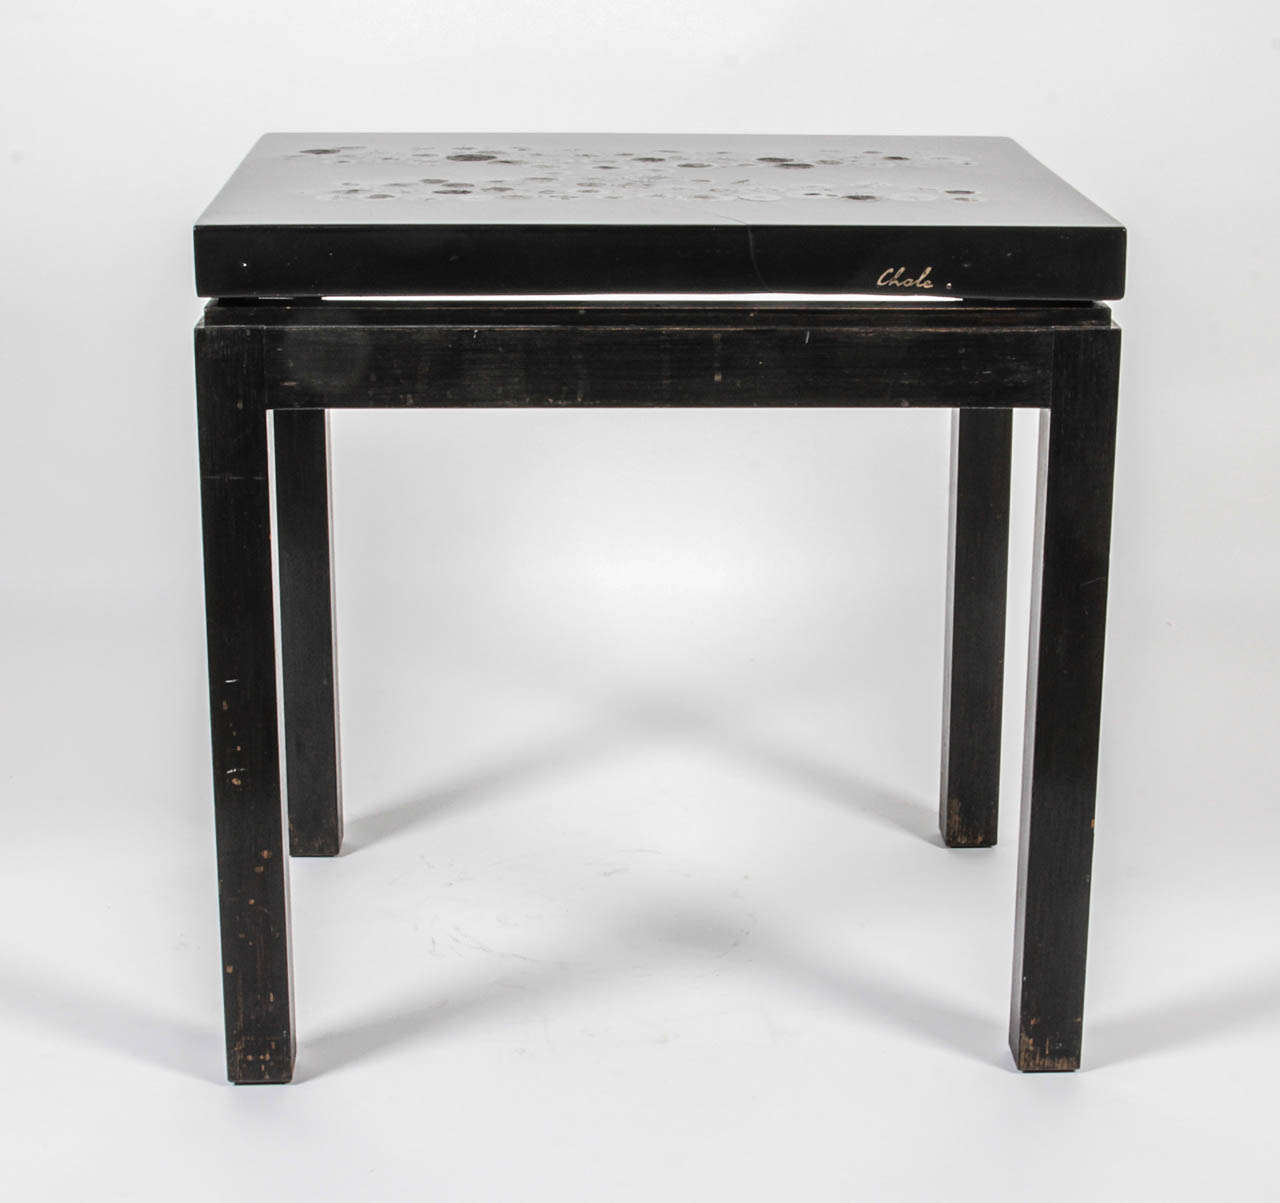 Pair of side table by Ado Chale, in black resin inlaid marcasite, signed in bronze, circa 1968, one is used by time (loony).